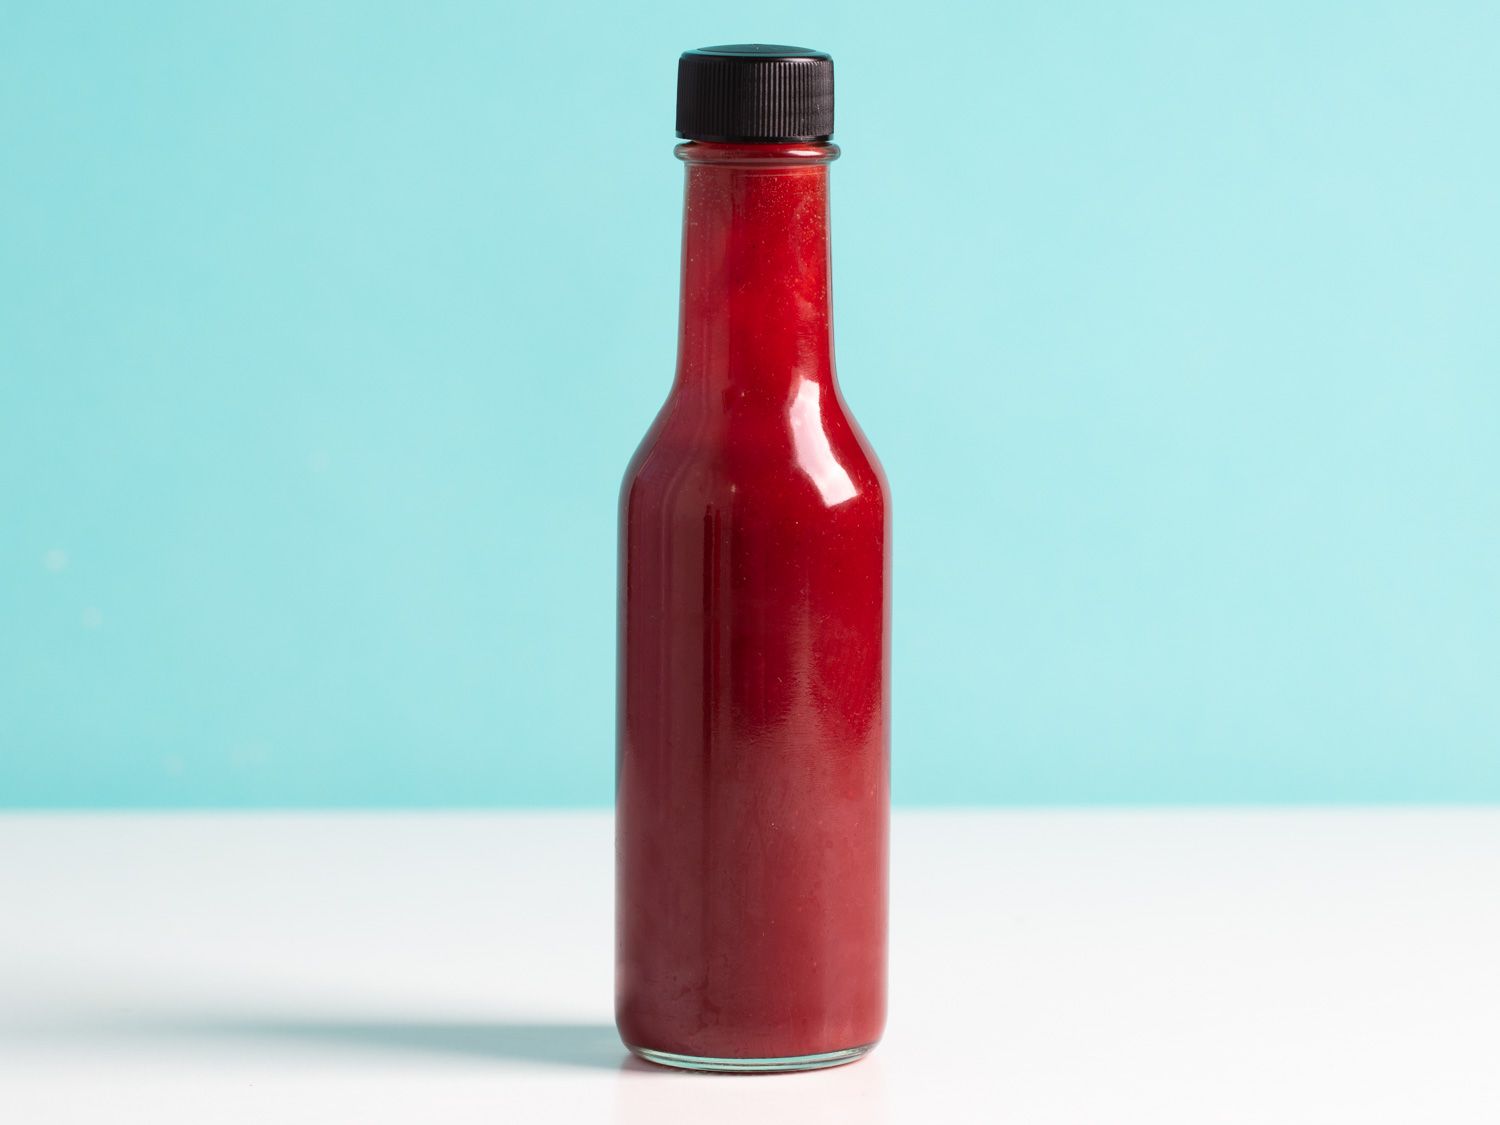 Habanero Hot Sauce: Brands, Uses, and Recipes